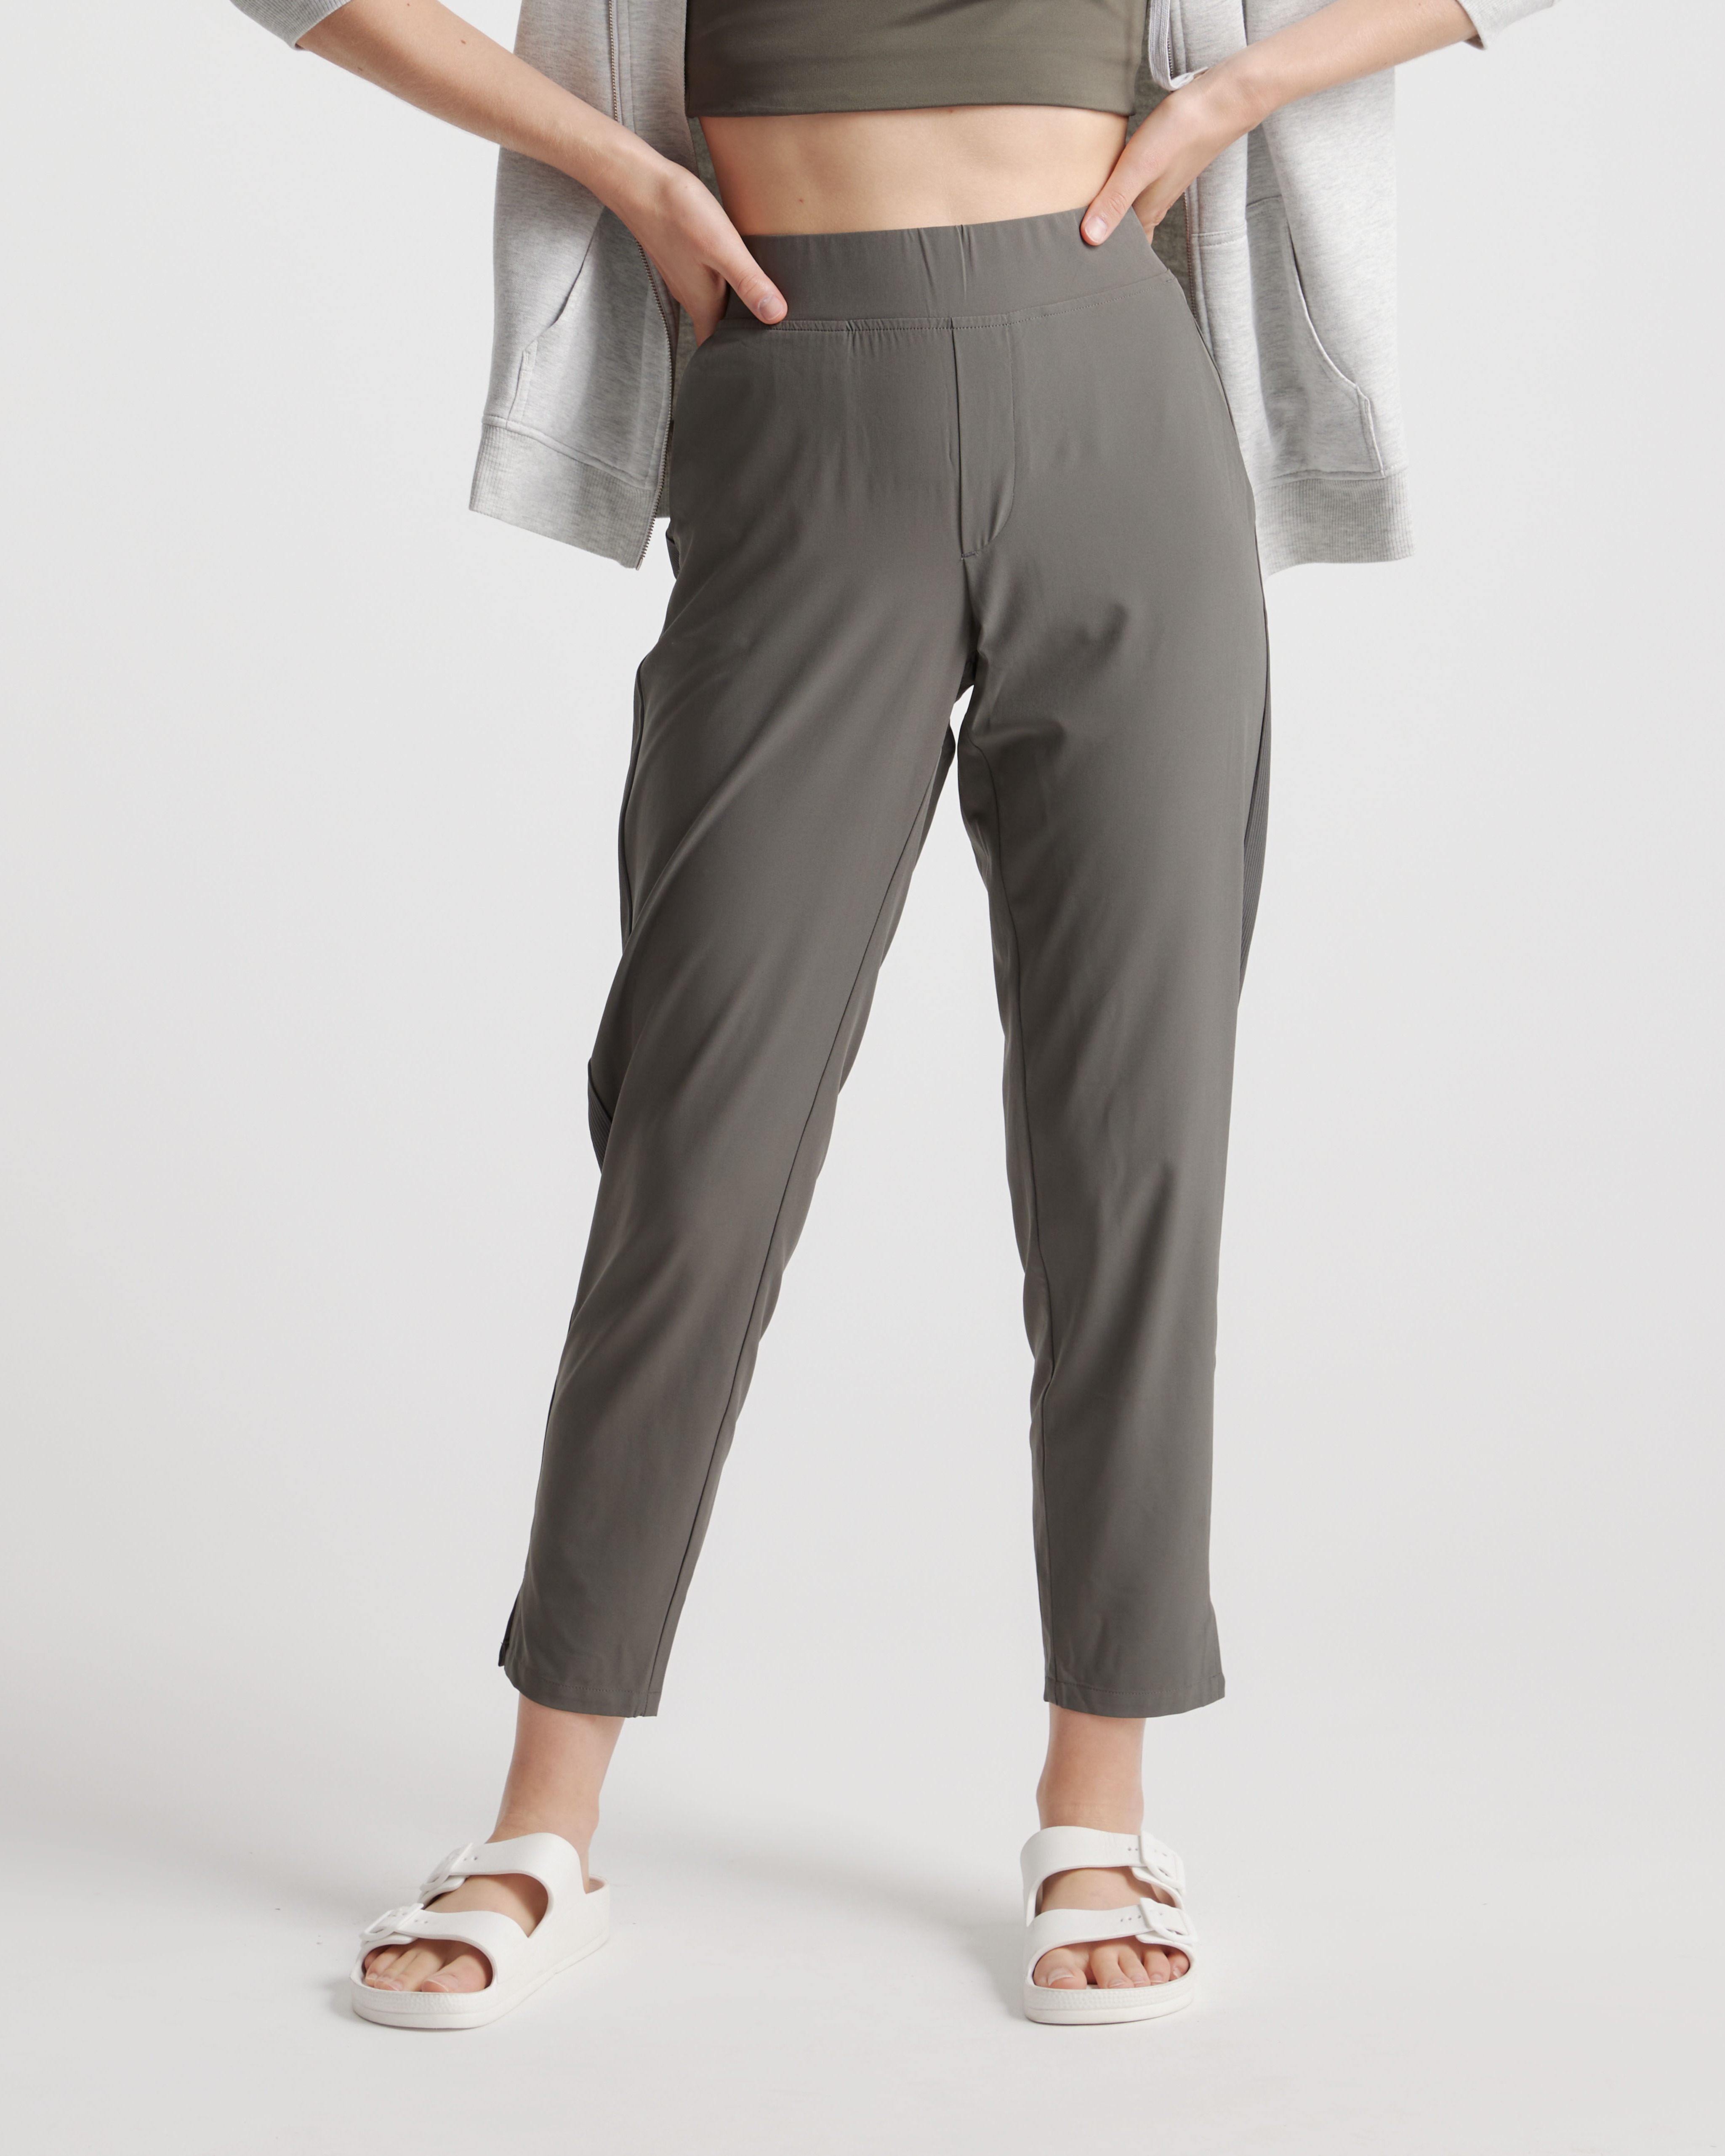 NWT Align Ribbed High-Rise Pant 25 – WRINKLED